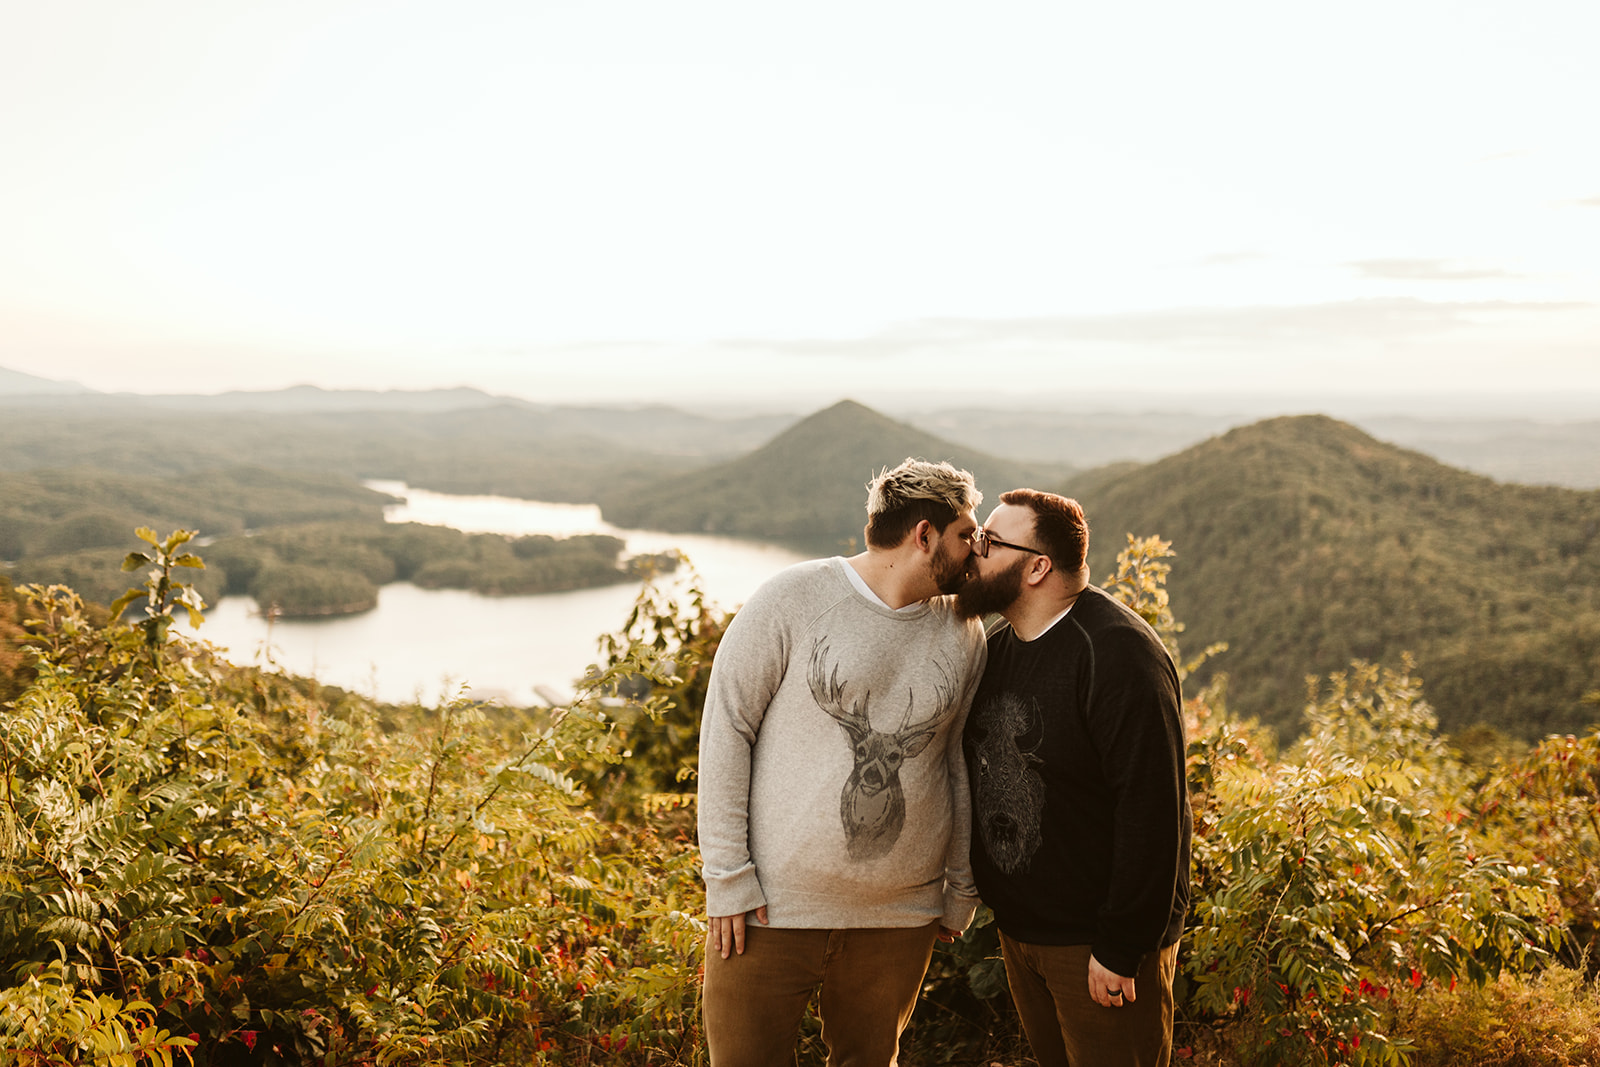 Couple kisses on a mountain overlook during their engagement photo session near Chattanooga.